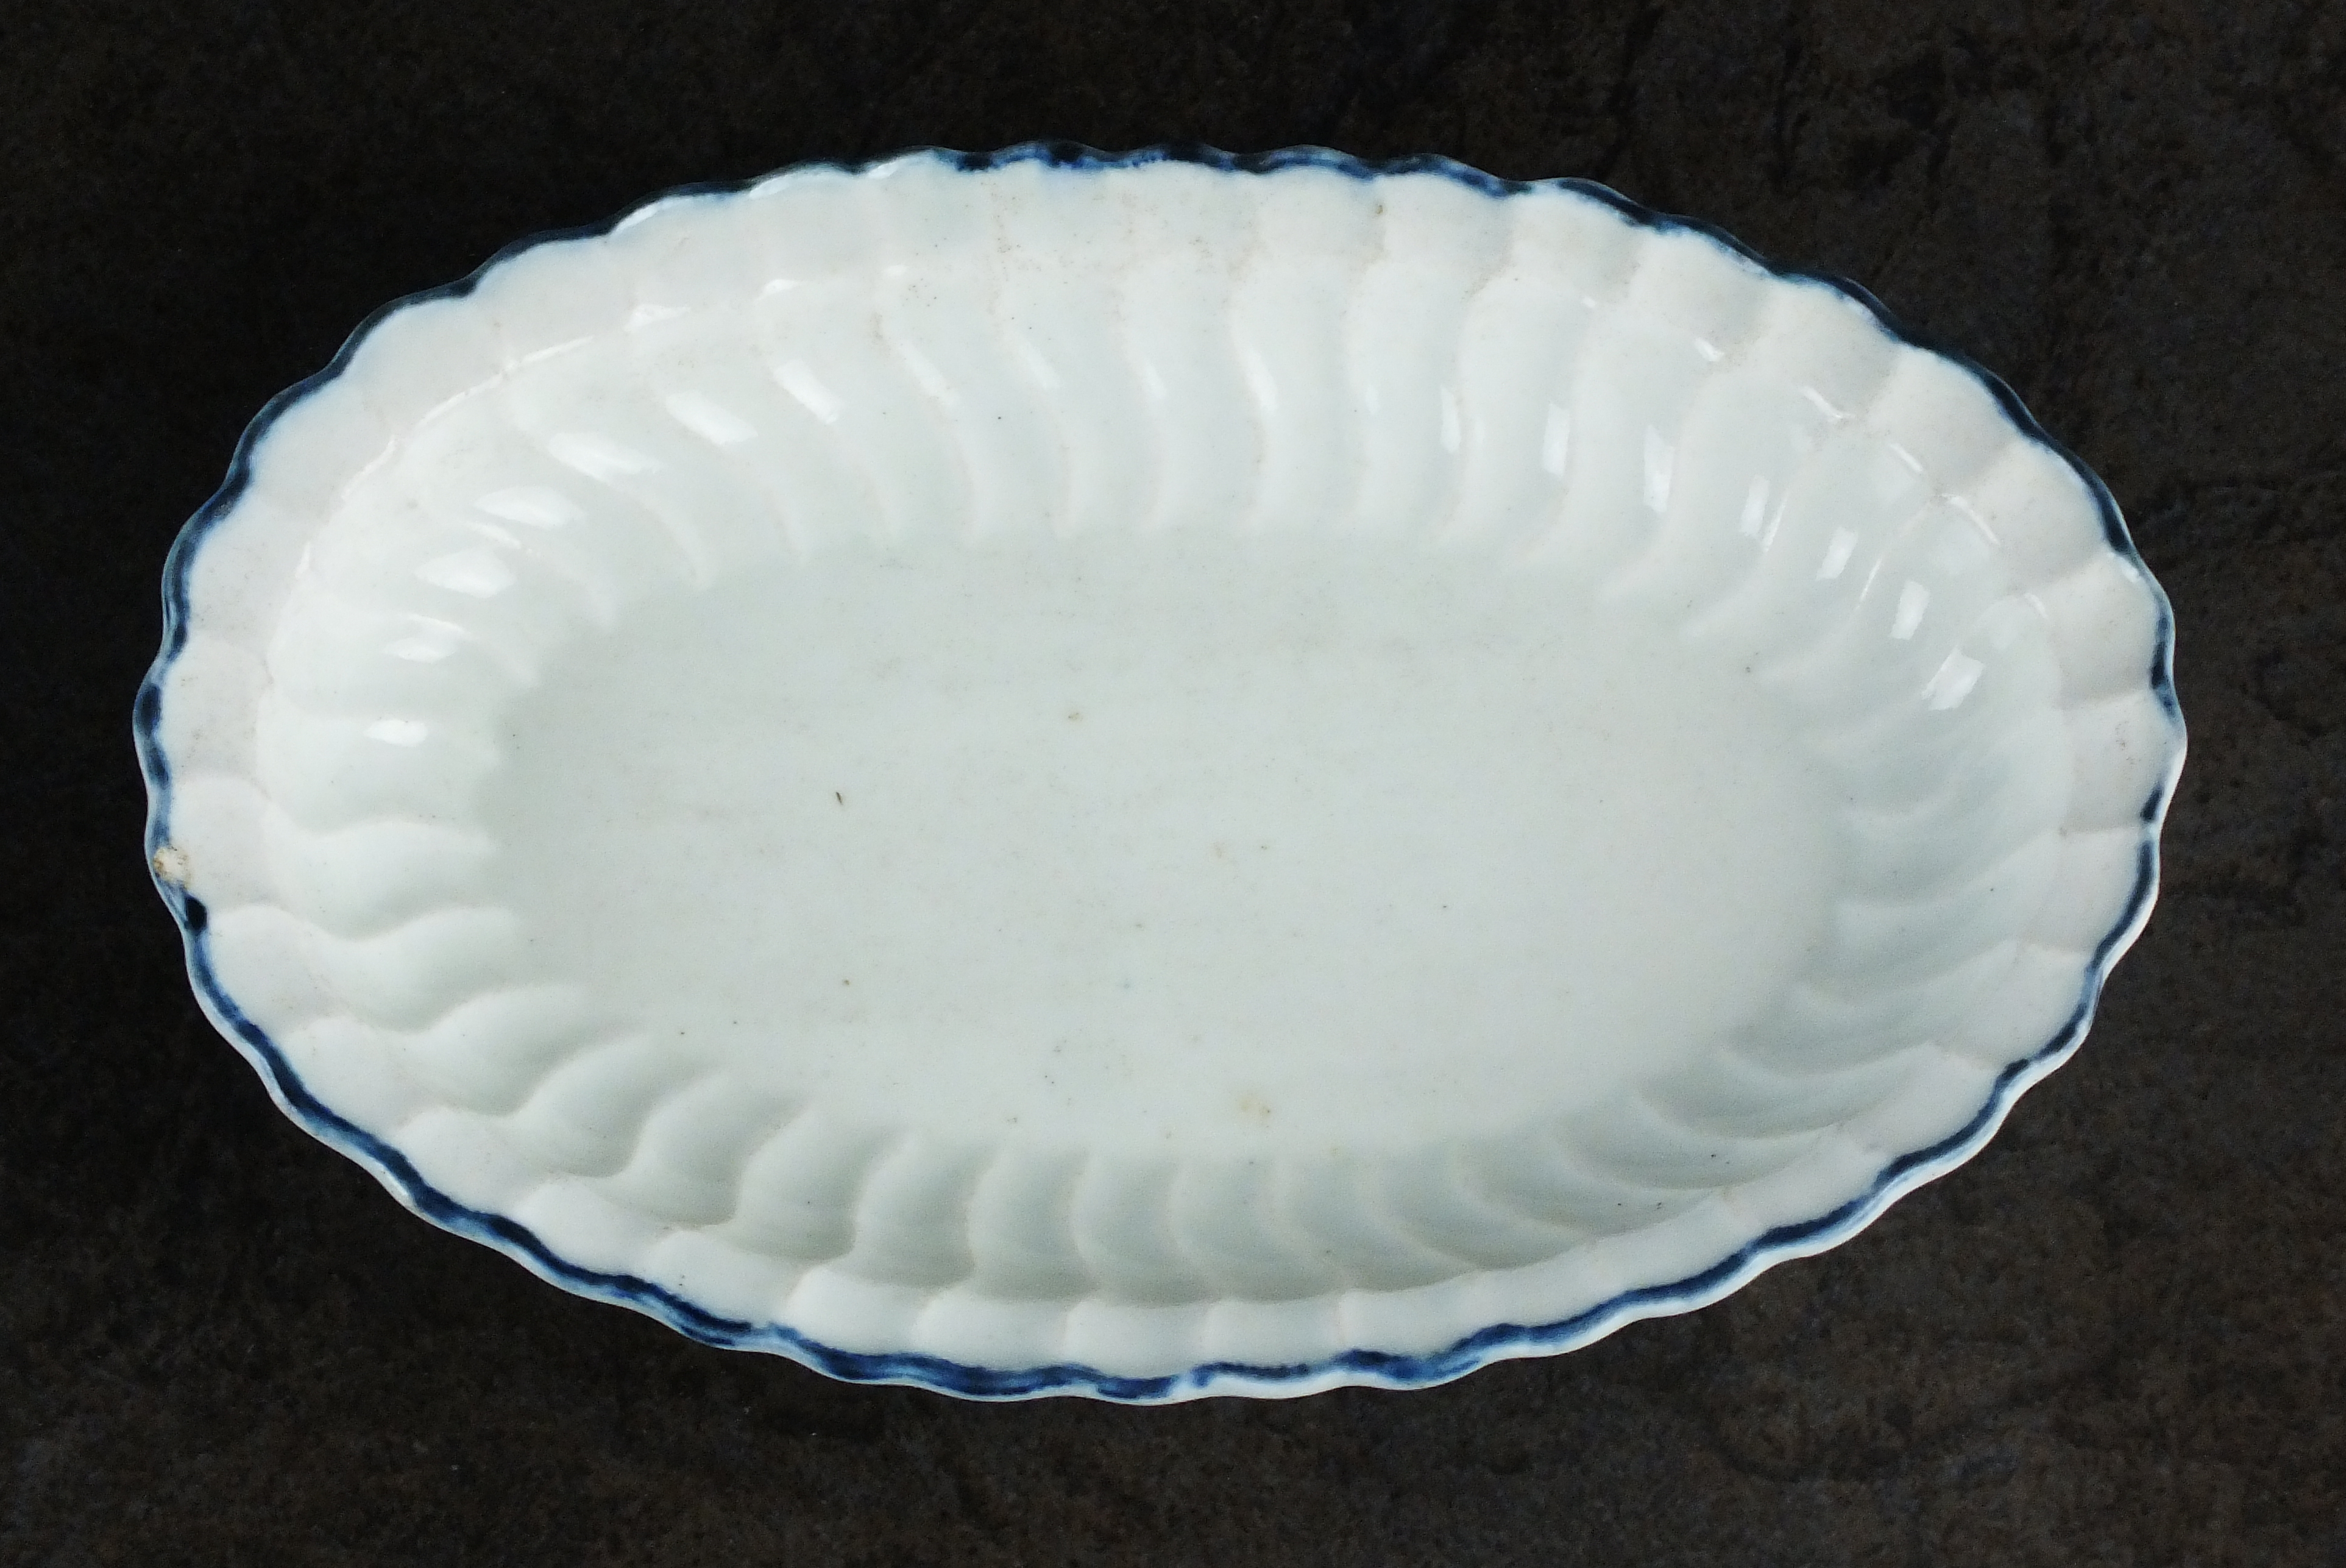 A Caughley small dish or tray, circa 1790, with half shanked body, plain white with underglaze blue